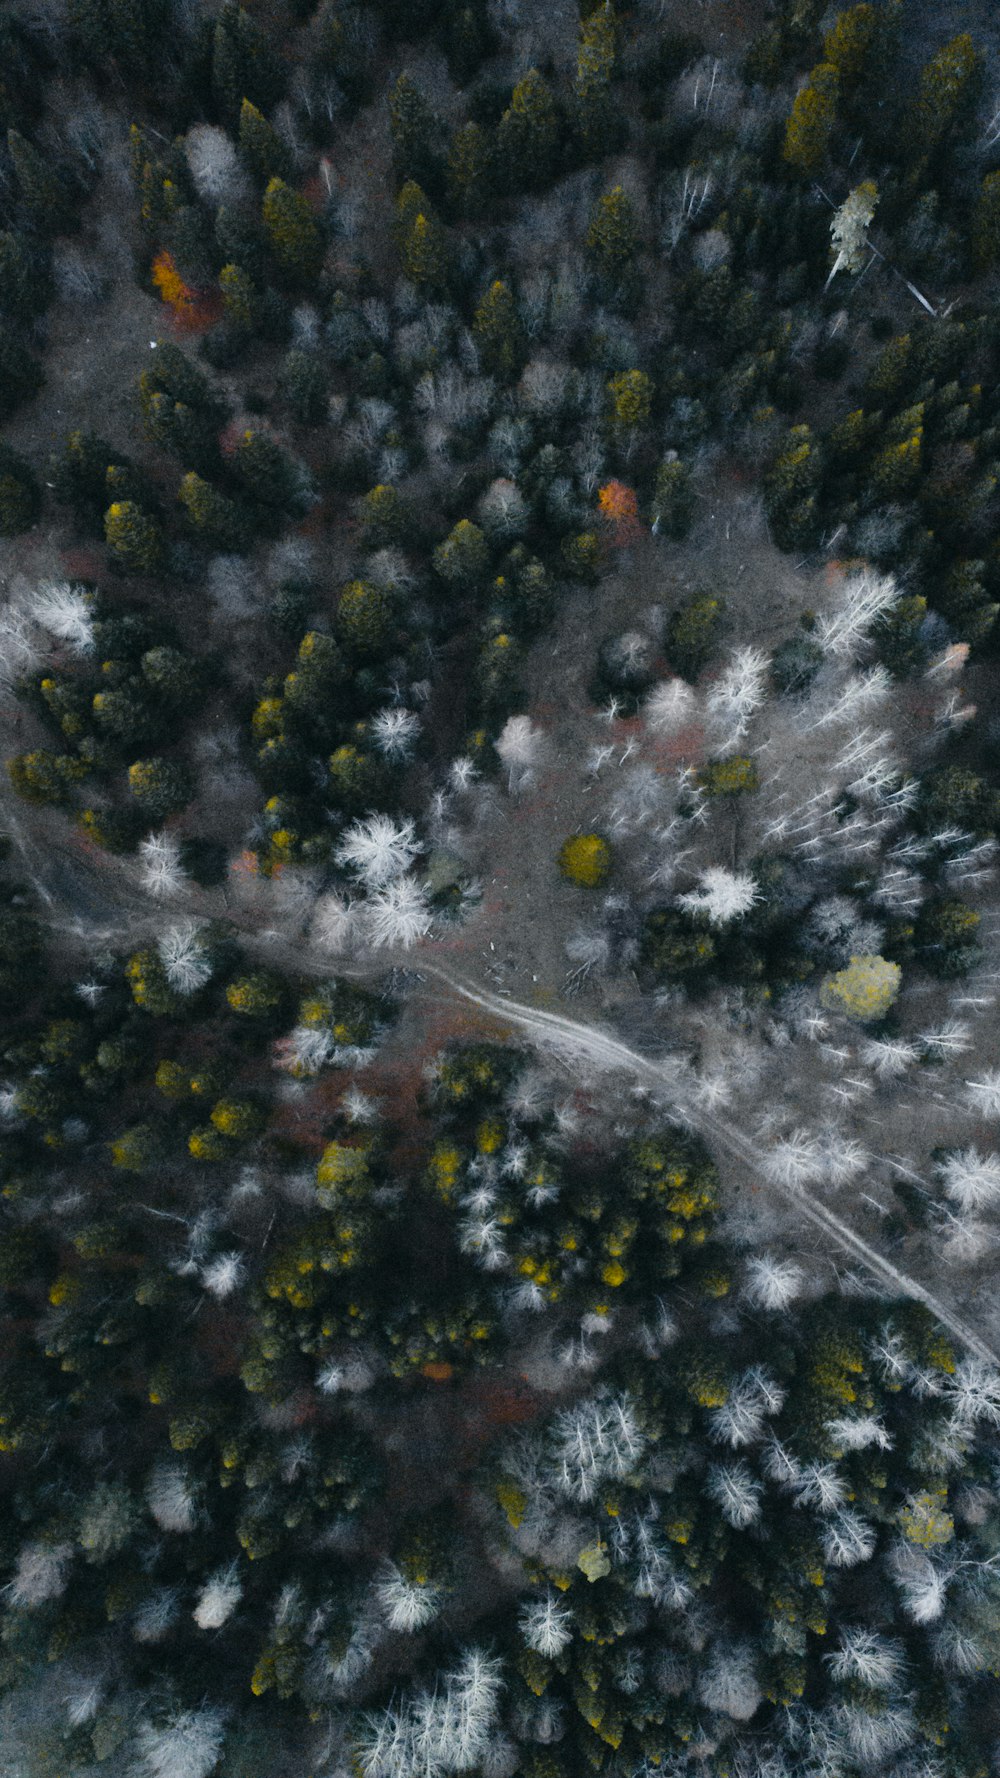 birds eye view of snow covered trees